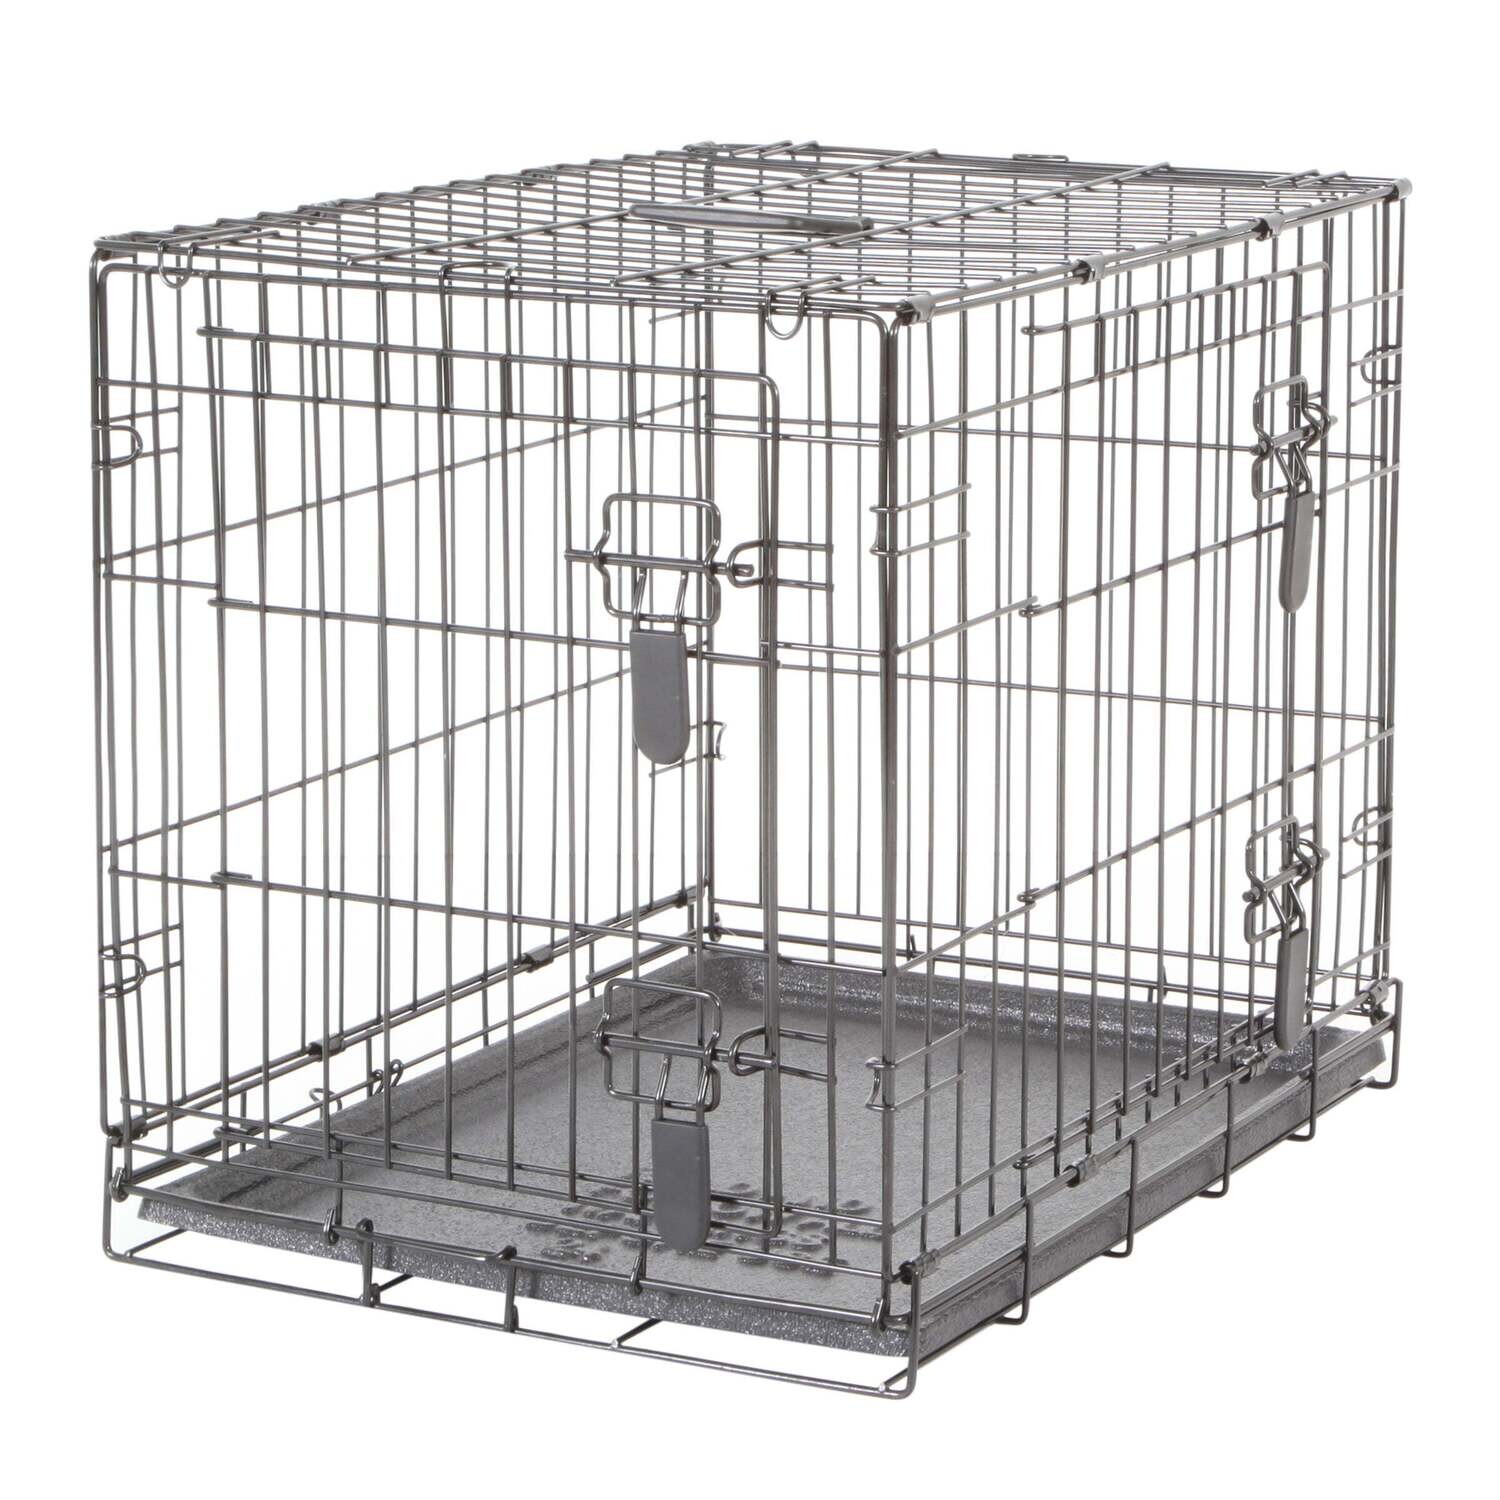 DOGIT DOG CRATE SMALL 24" x 17.5" x 20"